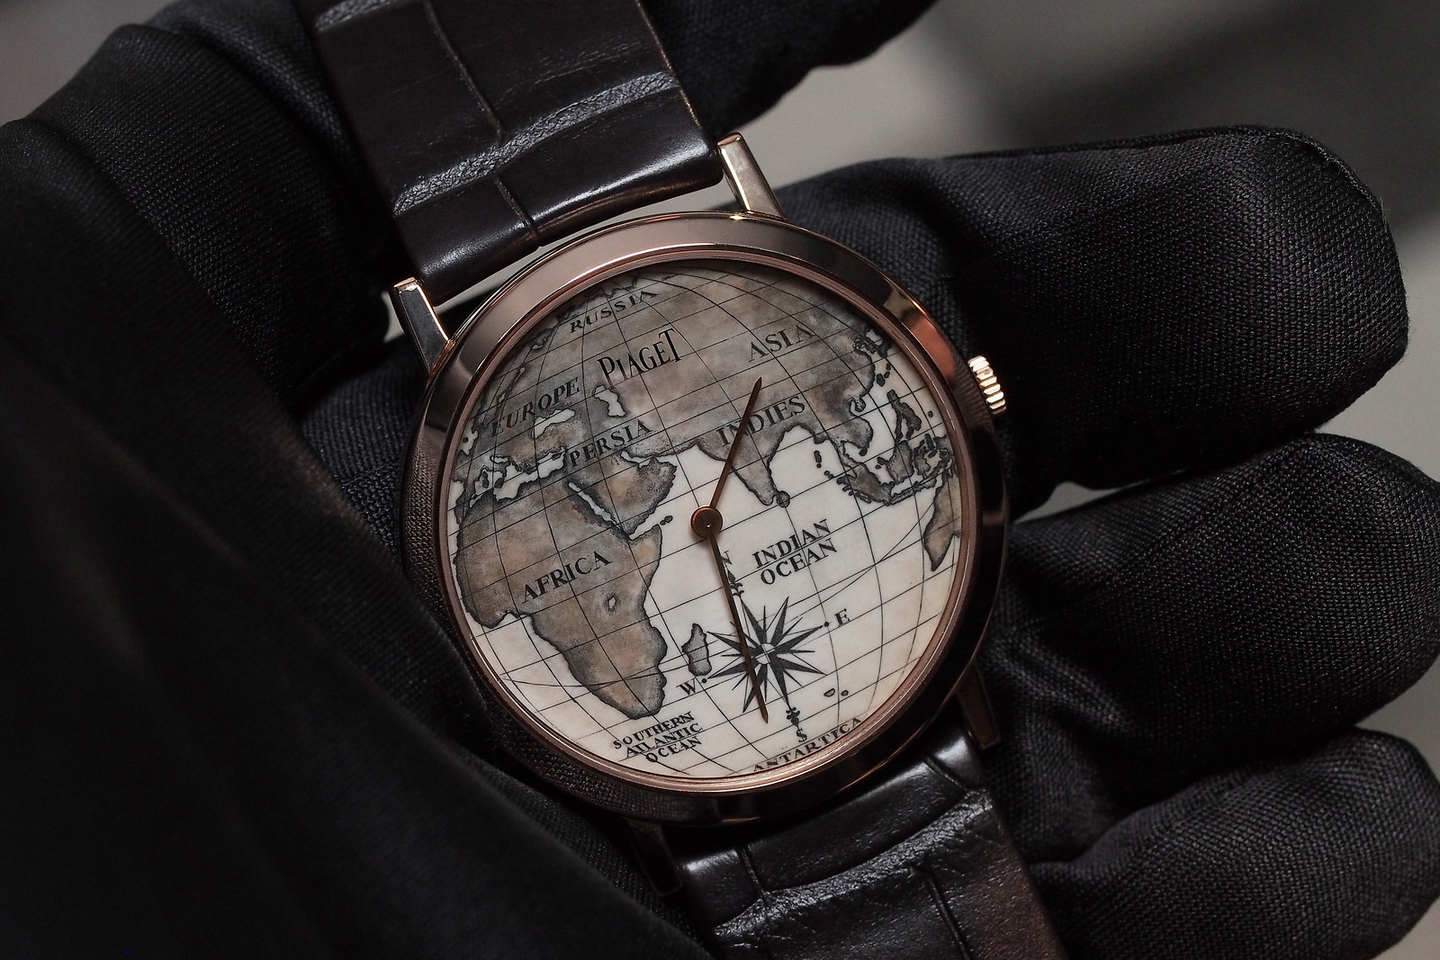 Piaget Highlights from SIHH 2014